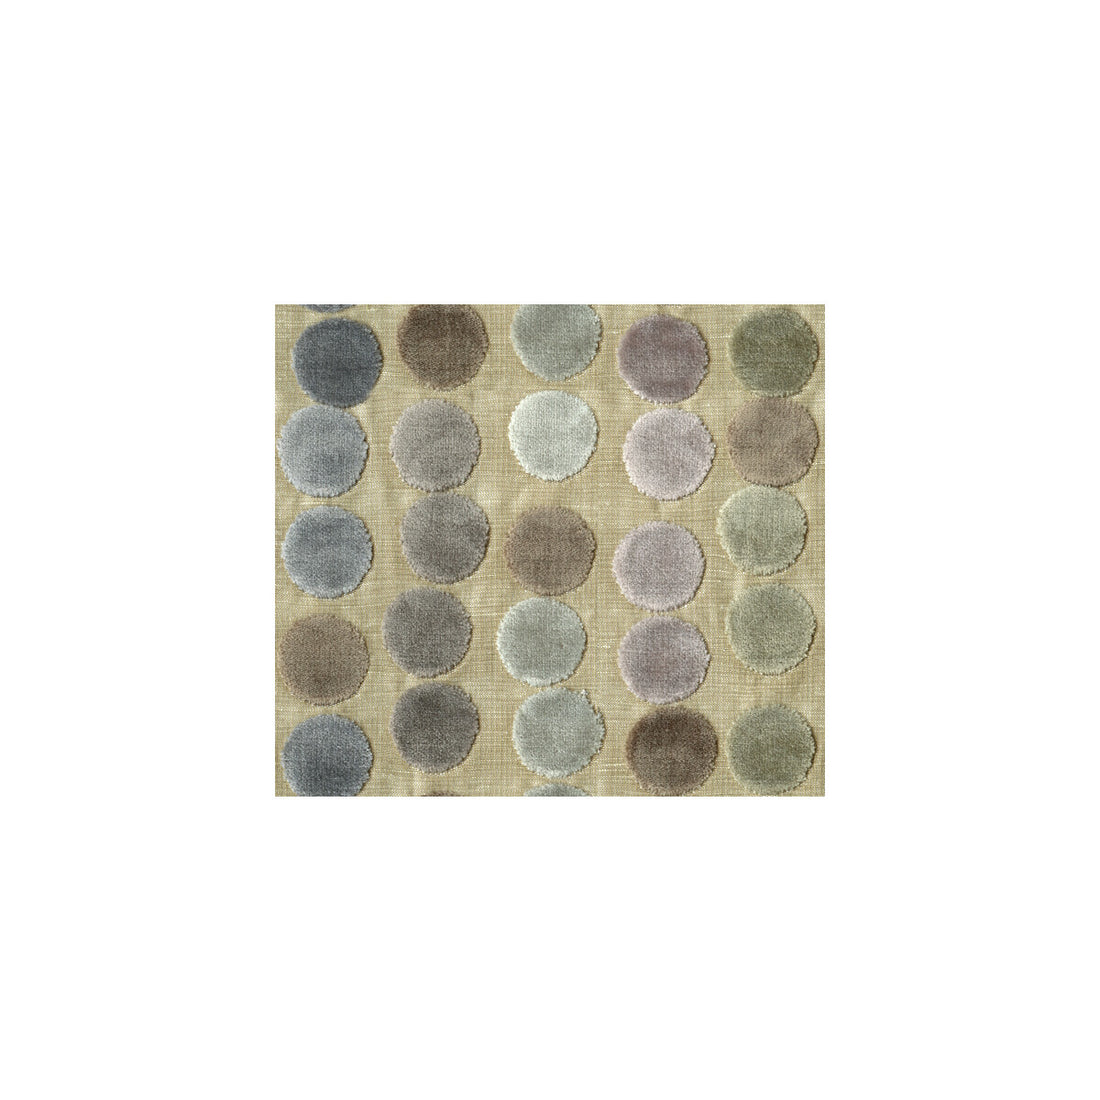 Darley Spot fabric in soft mauve/taupe/silver color - pattern PF50303.1.0 - by Baker Lifestyle in the Denbury collection